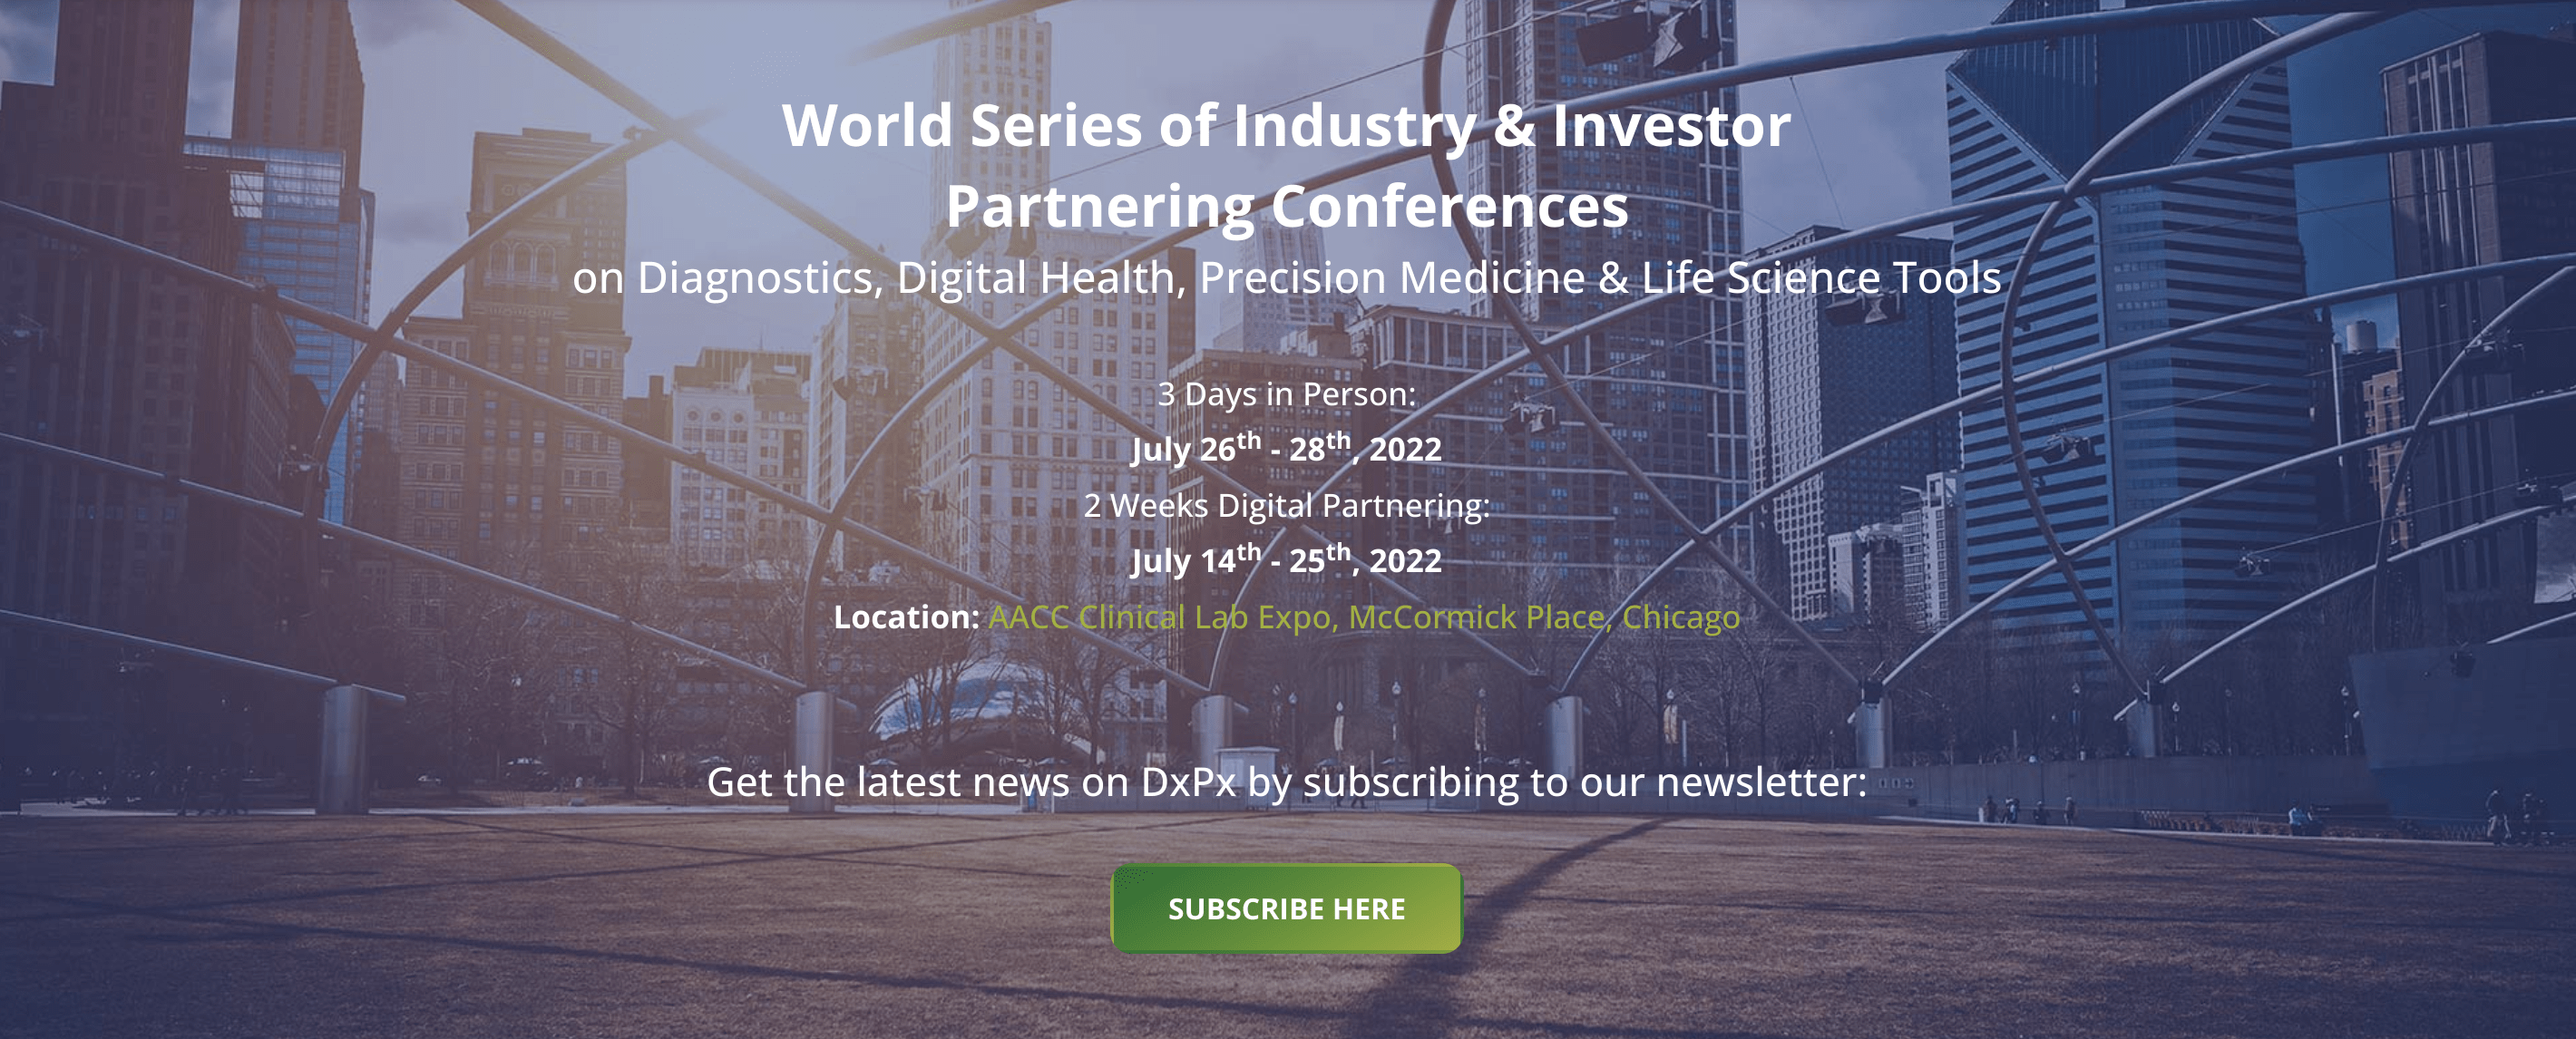 Details for World Series of Industry & Investor Partnering Conferences